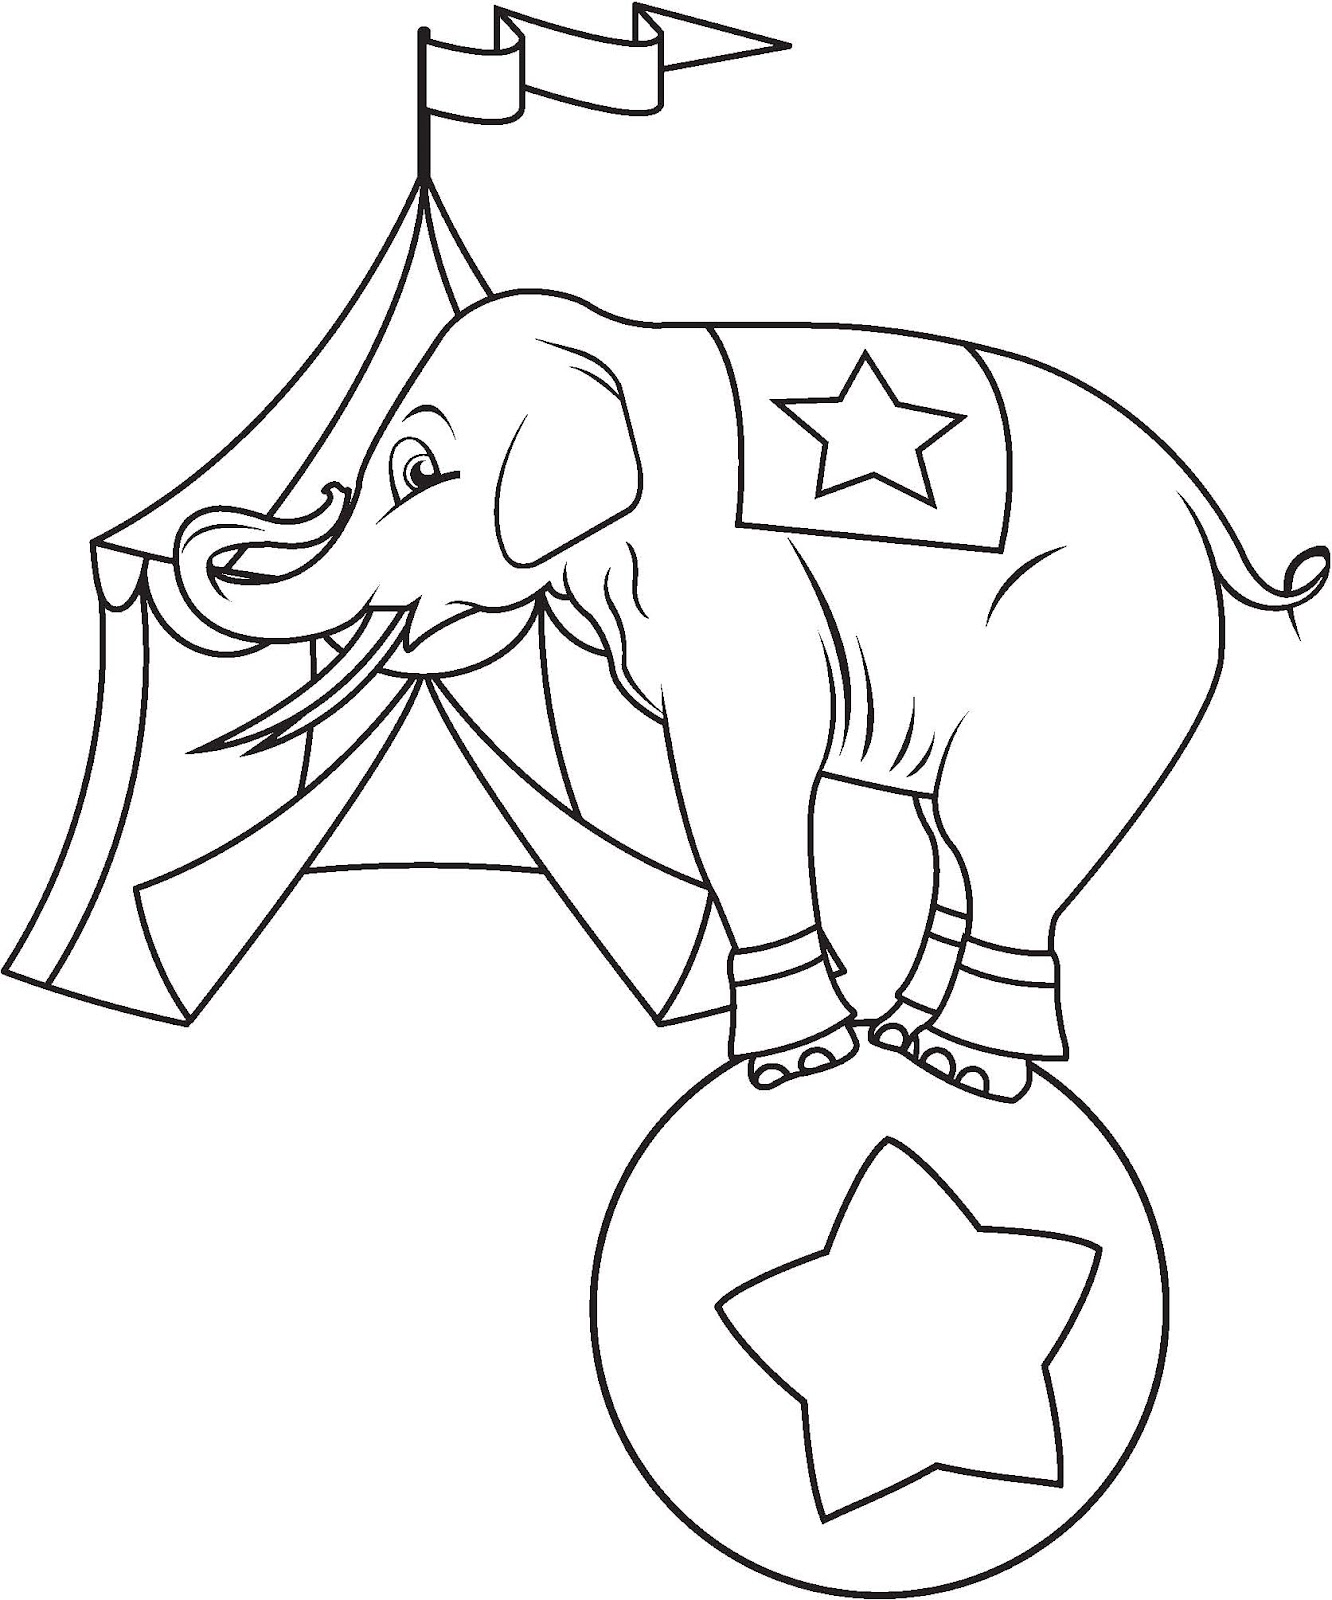 circus train car Colouring Pages (page 2)